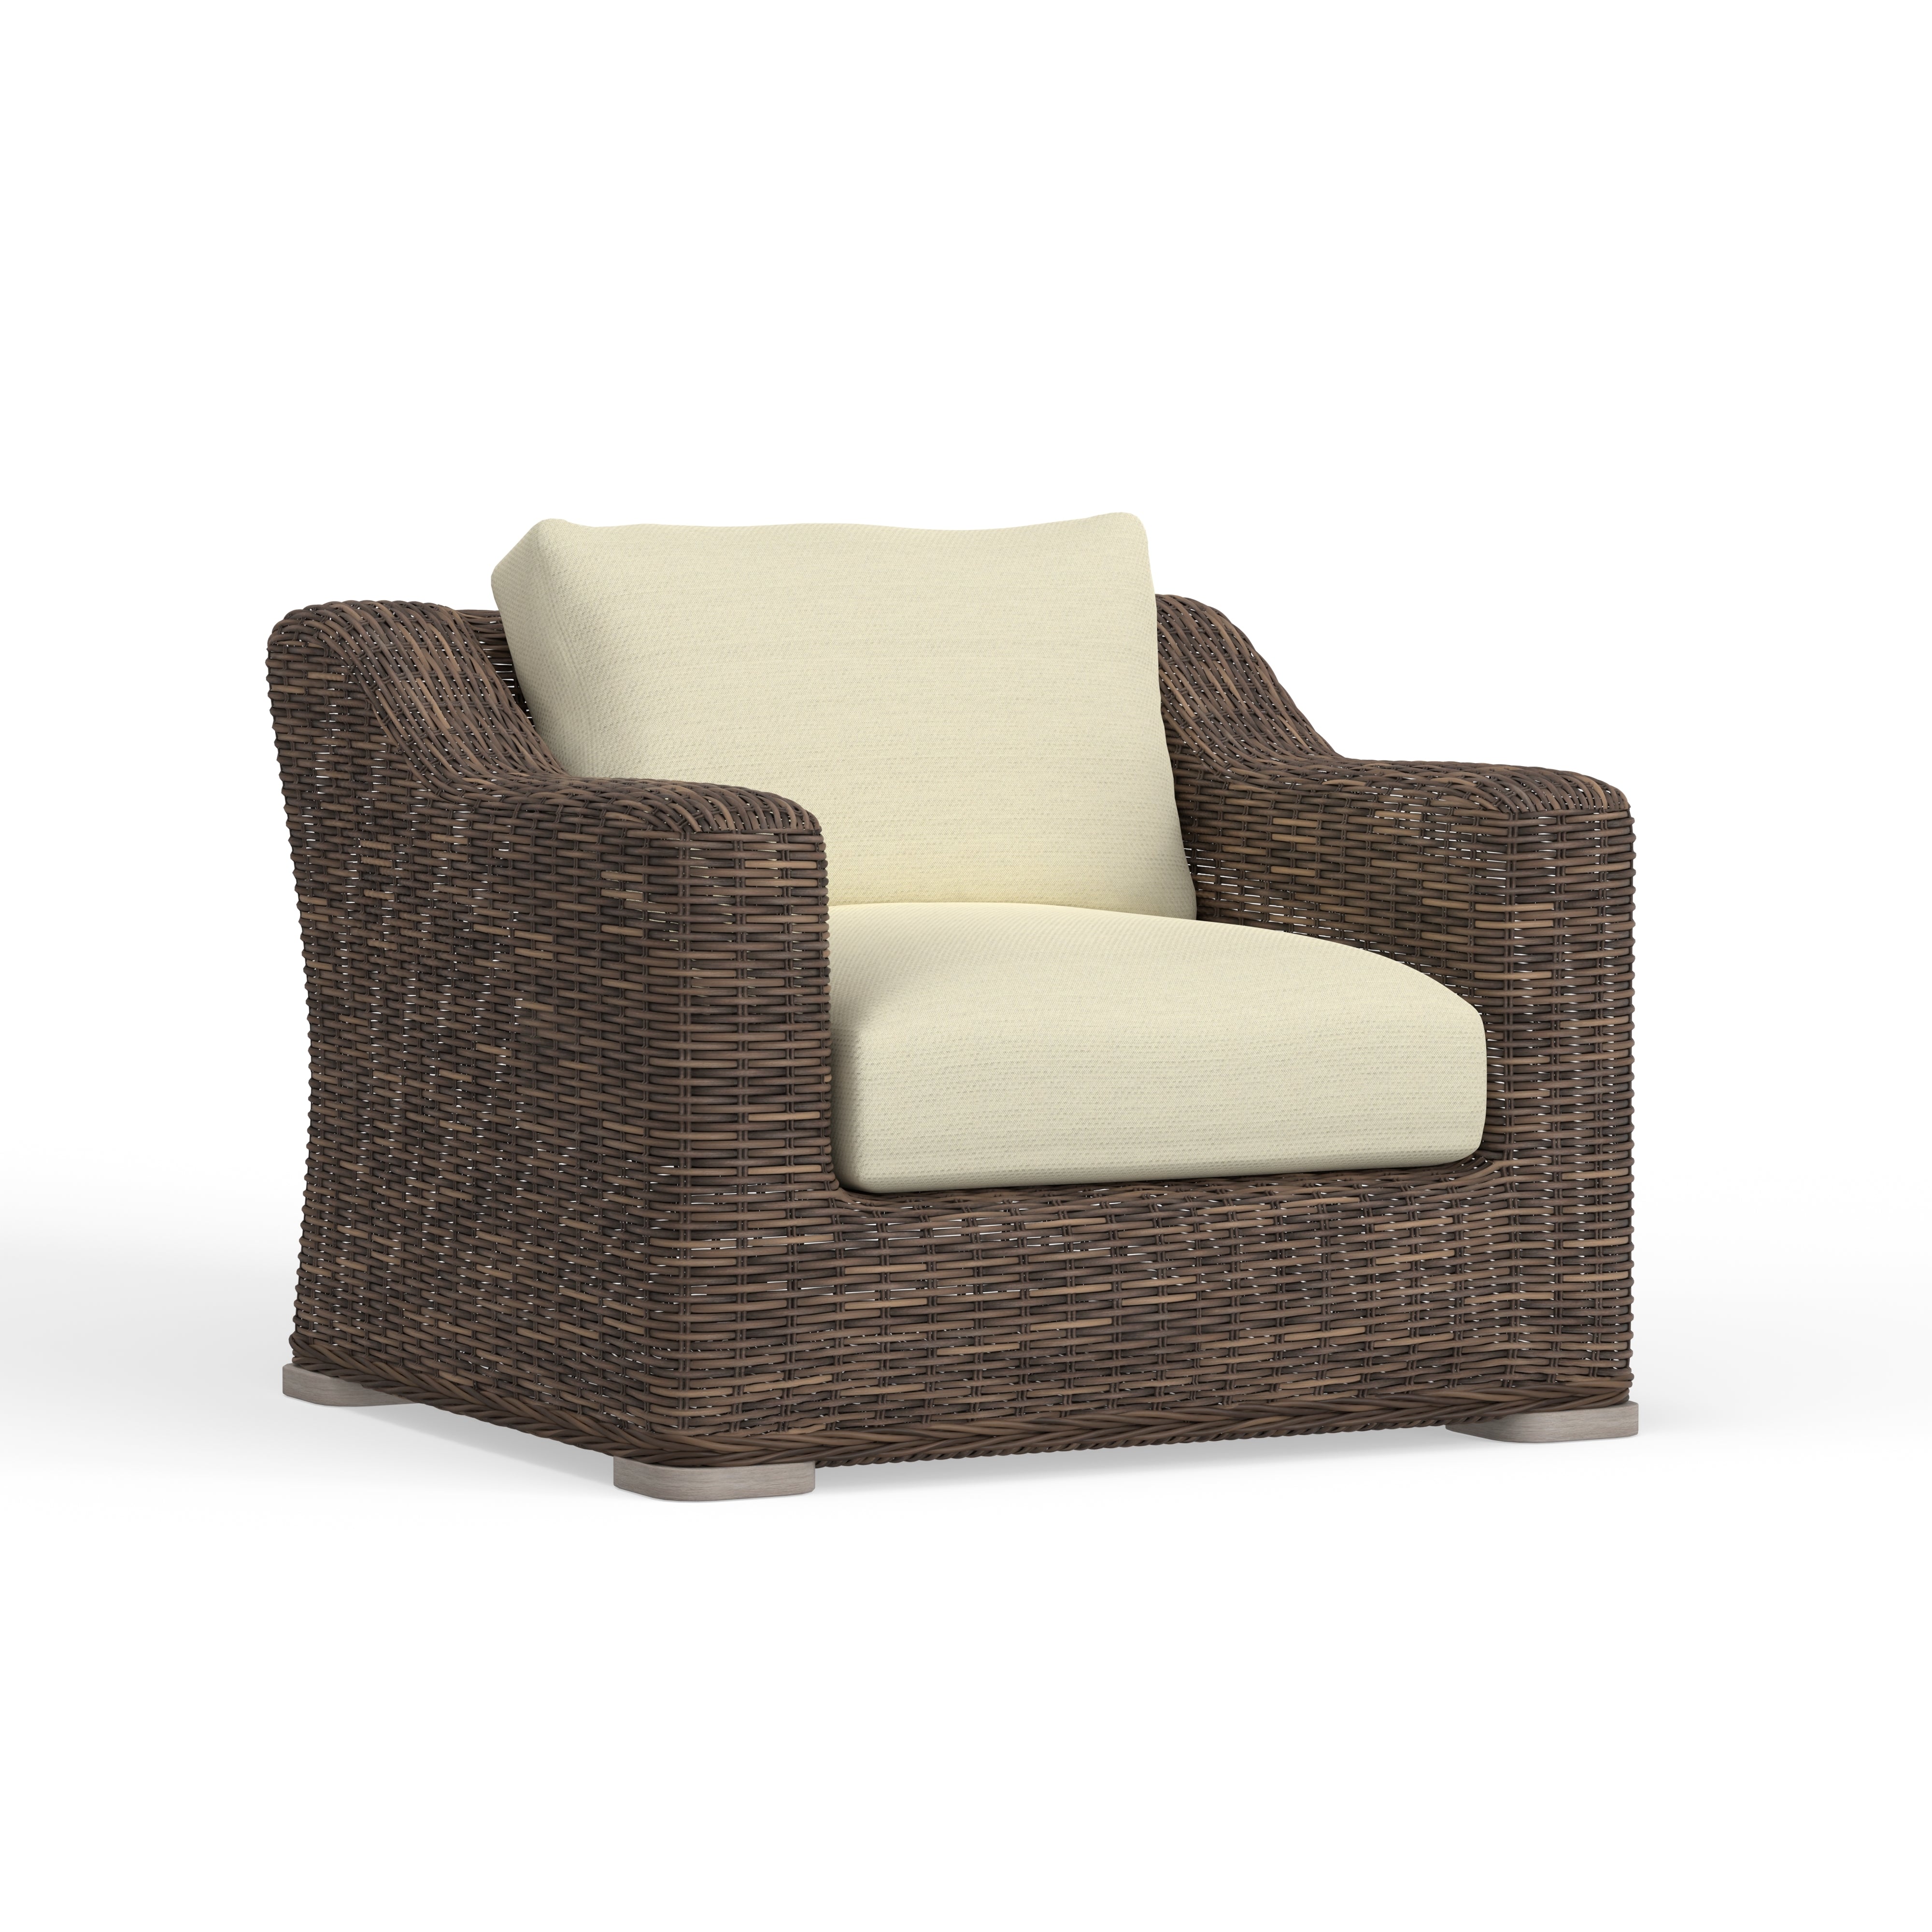 Quality Wicker Set That Will Last Outdoors Forever